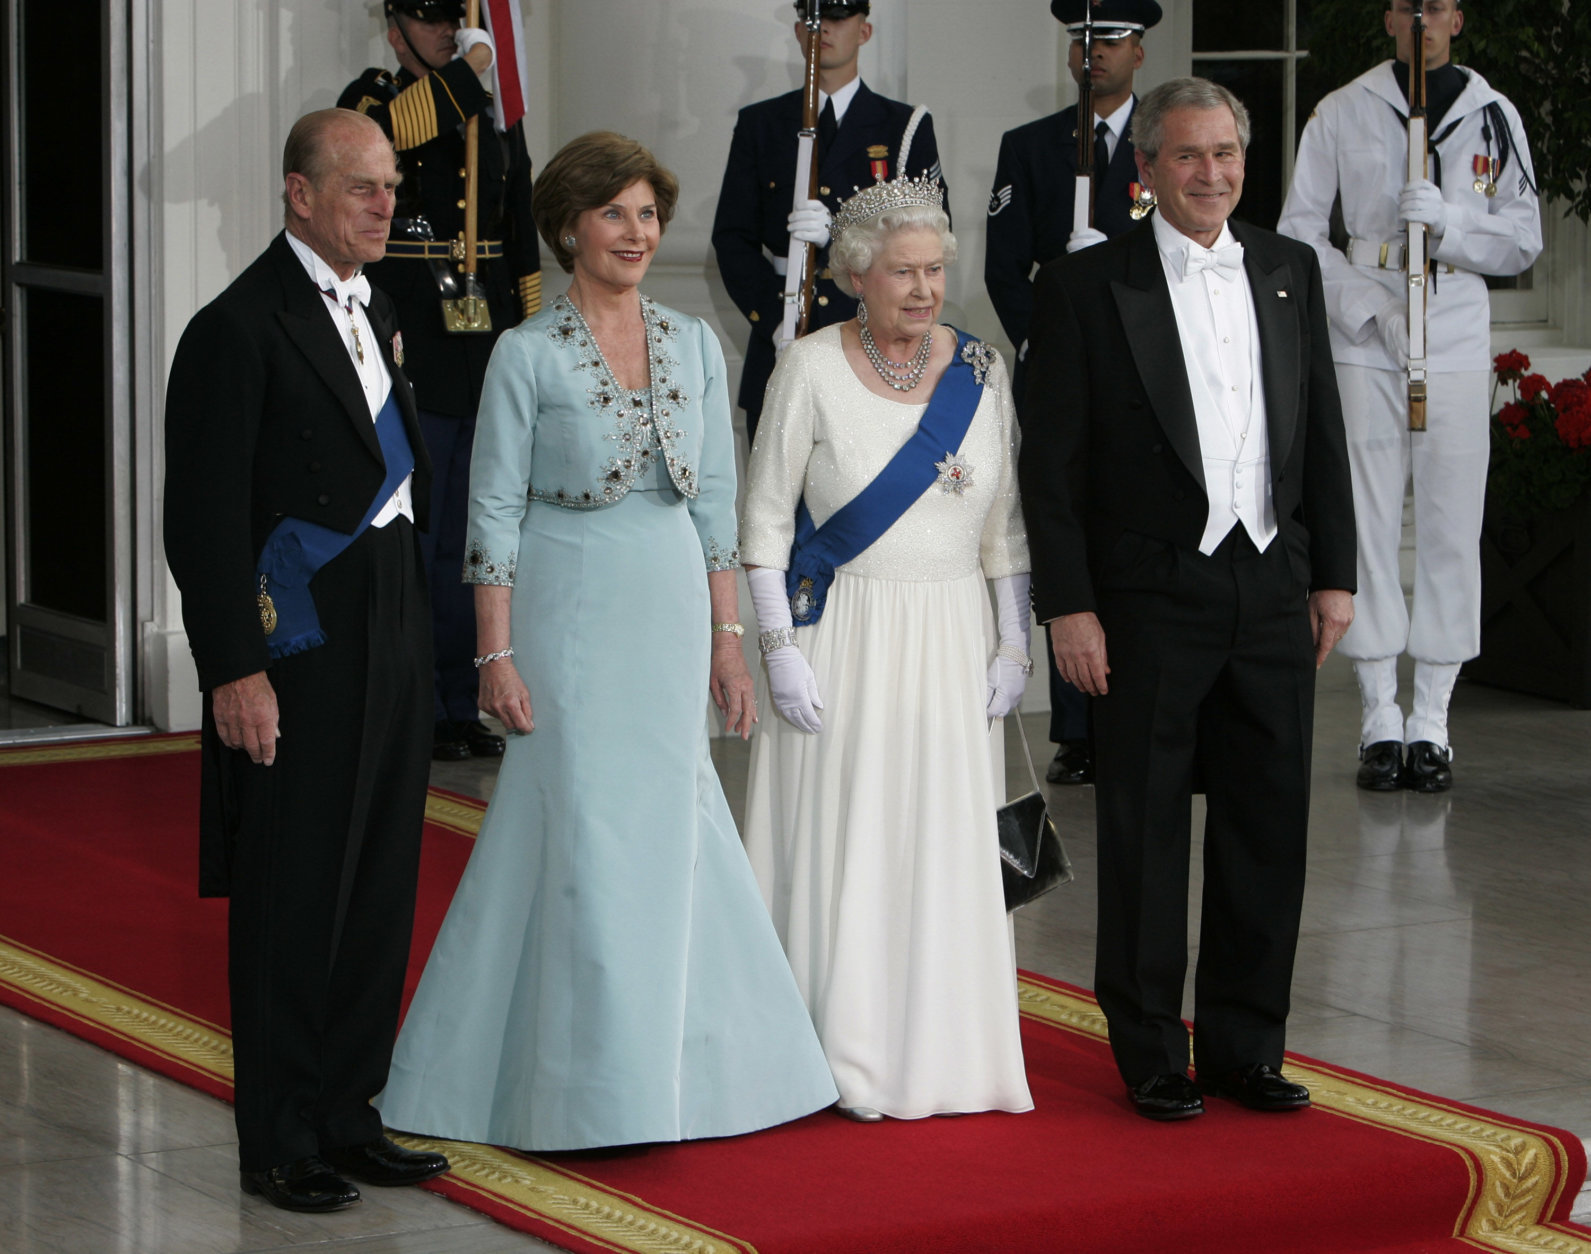 President Bush and first lady Laura Bush greet Queen Elizabeth II and  Prince Philip, Monday, May 7, 2007, as they arrive for dinner at the White House in Washington.  (AP Photo/Ron Edmonds)